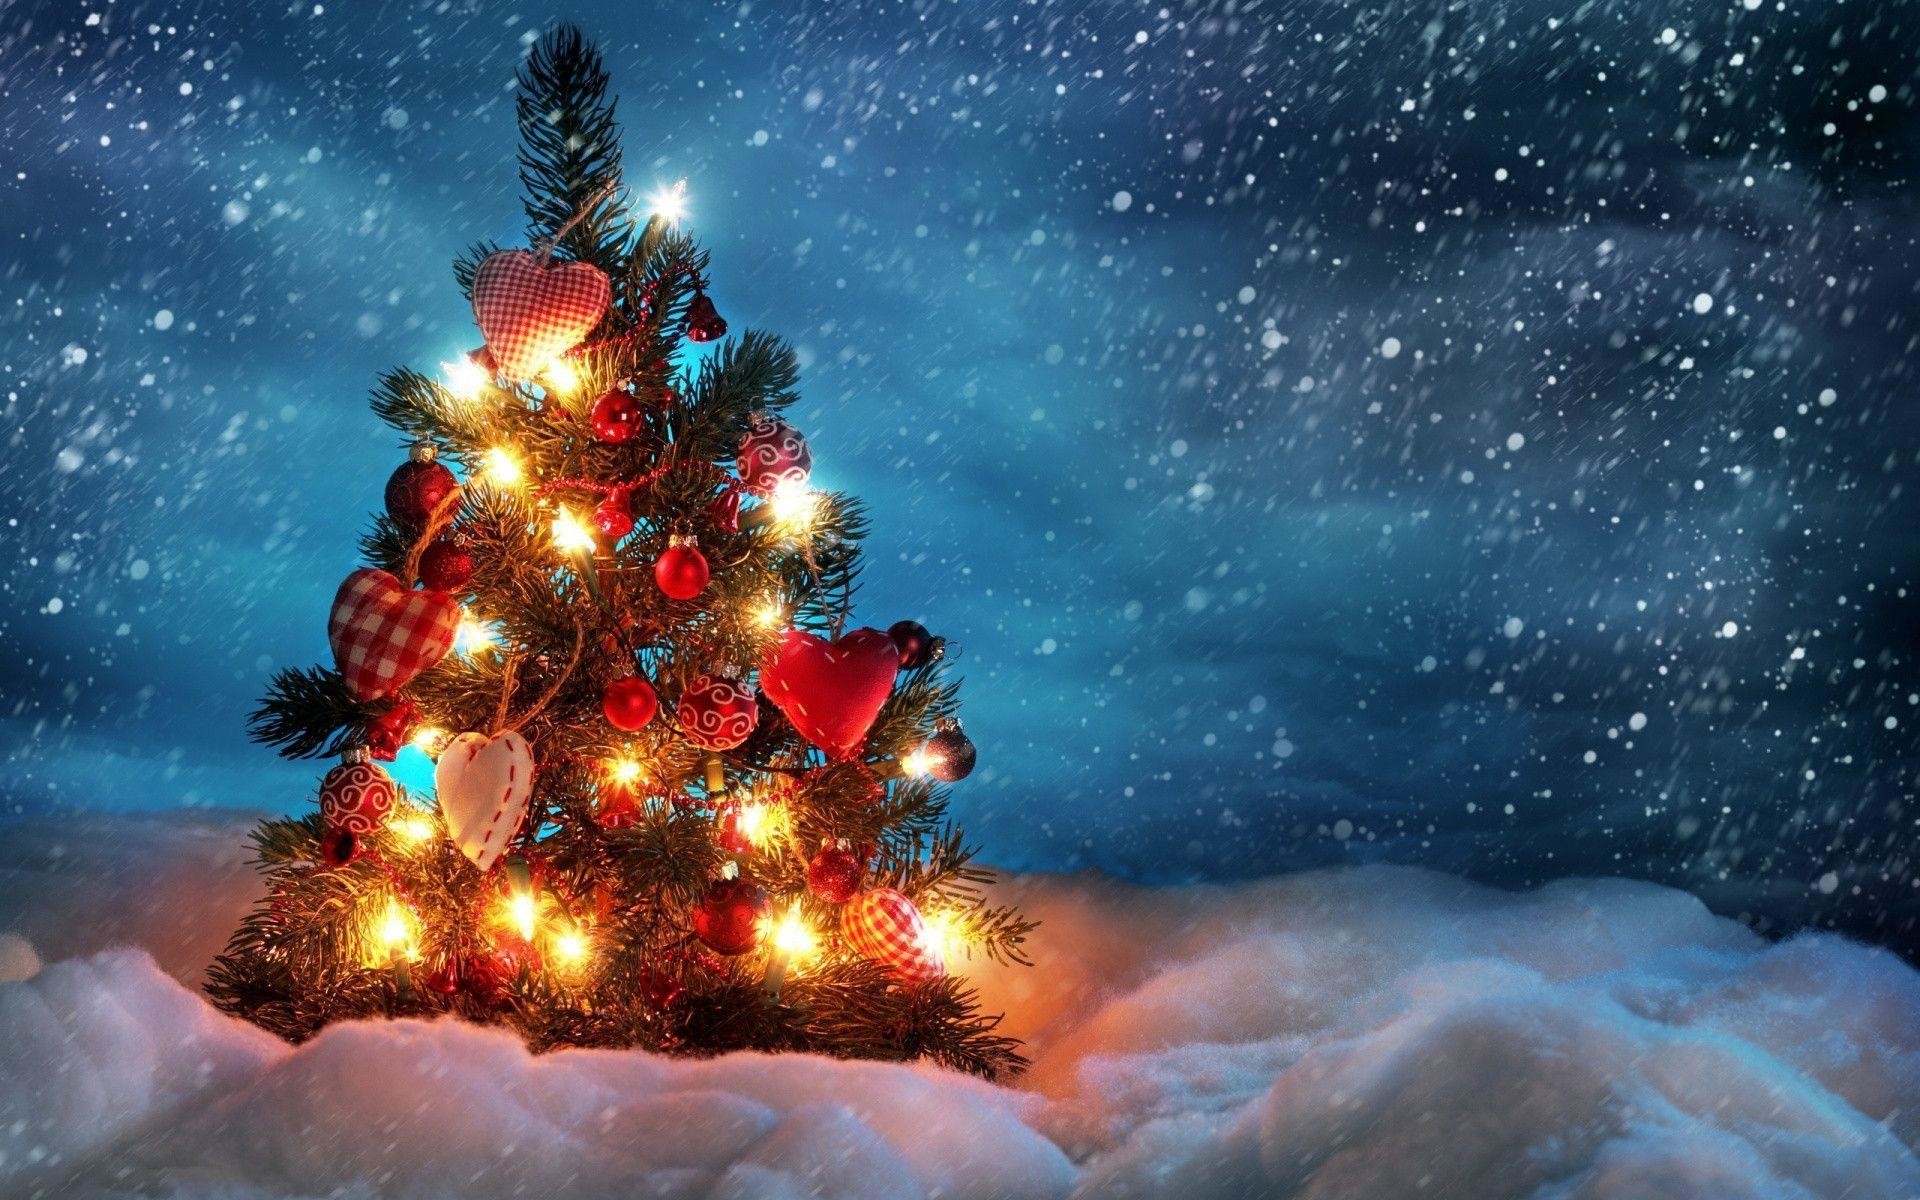 1920x1200 Wallpapers For > Cute Christmas Wallpapers For Desktop